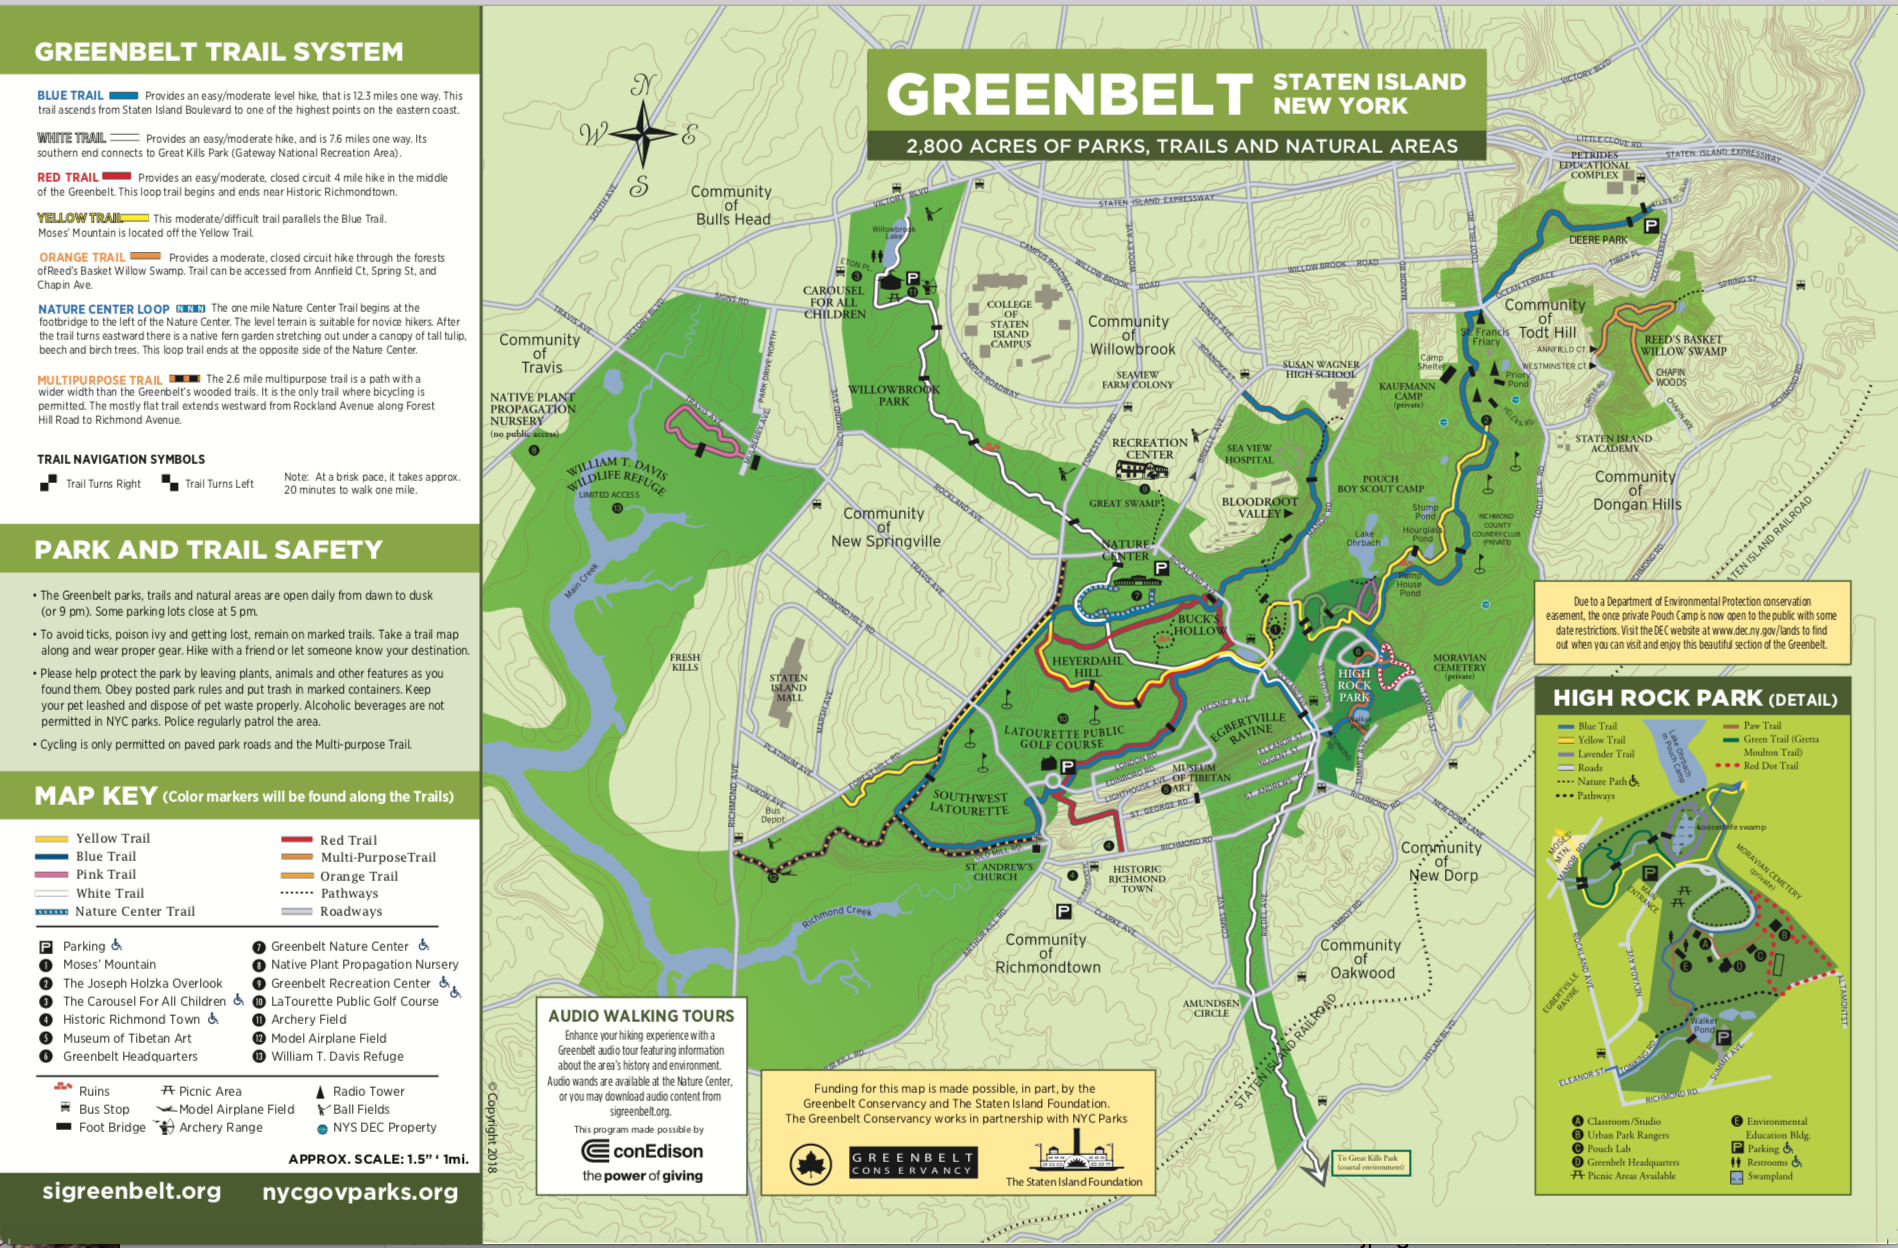 Staten Island Greenbelt Map Hiking And Running Trails Are Open For Solitary Recreation. The Greenbelt  Nature And Recreation Centers Are Closed. Programs Canceled Through April  29. – Greenbelt Conservancy